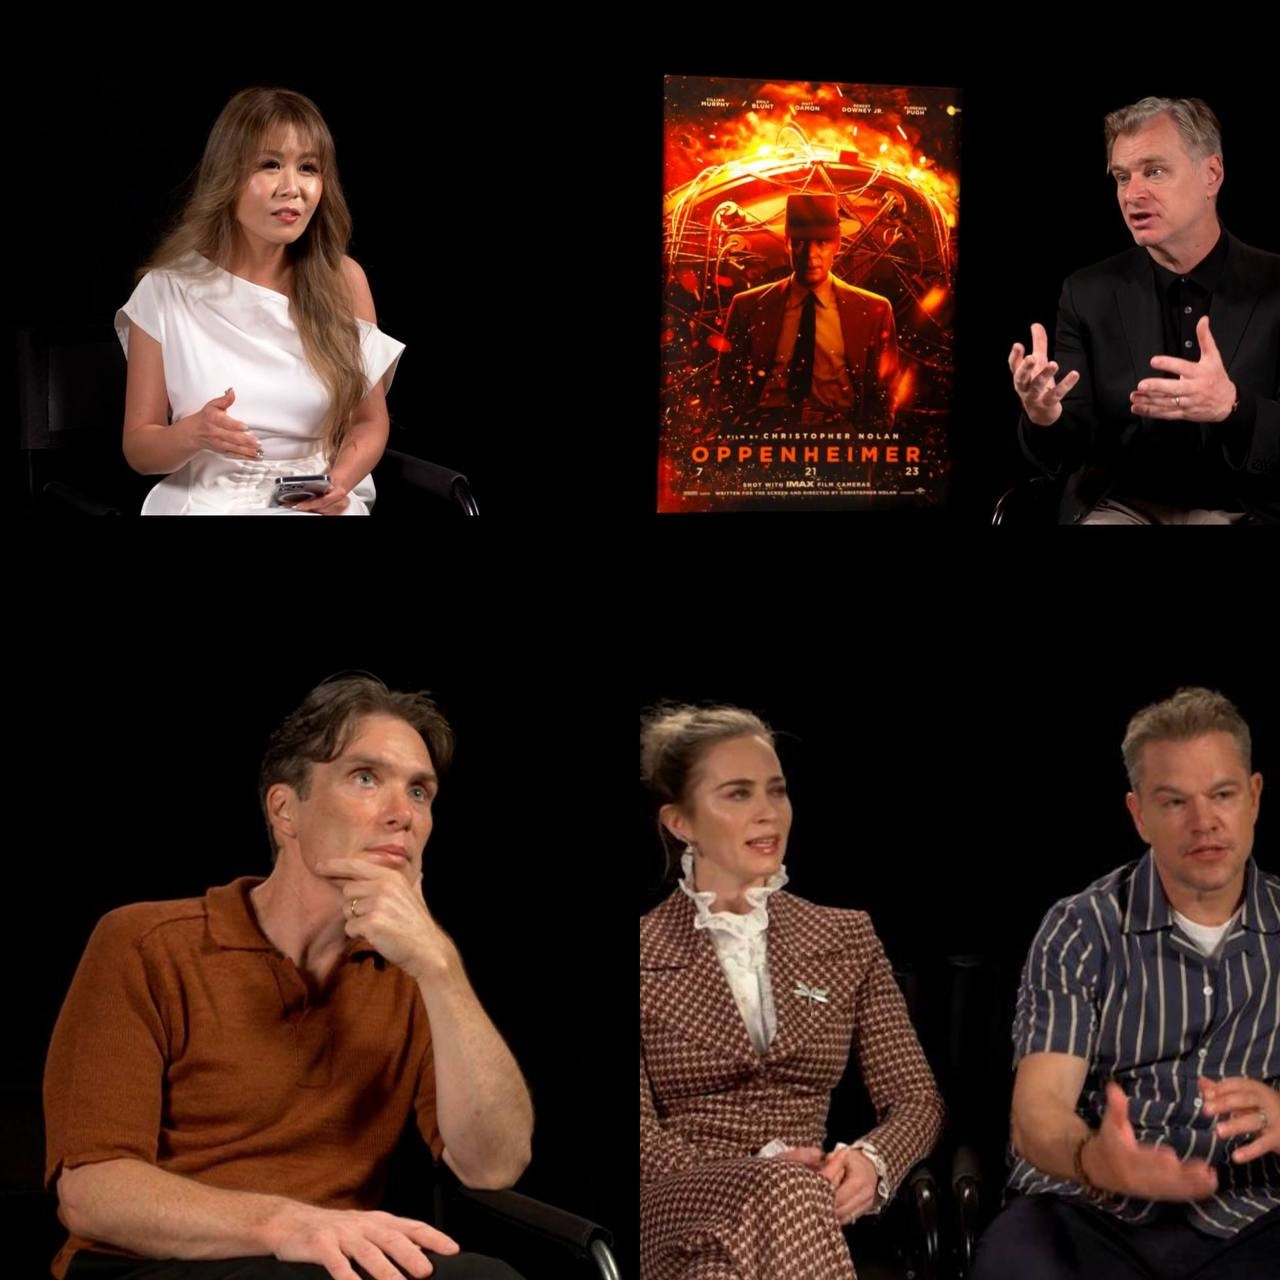 Yasminne chats with the director & cast of OPPENHEIMER - the biographical thriller about the invention of the atomic bomb!!